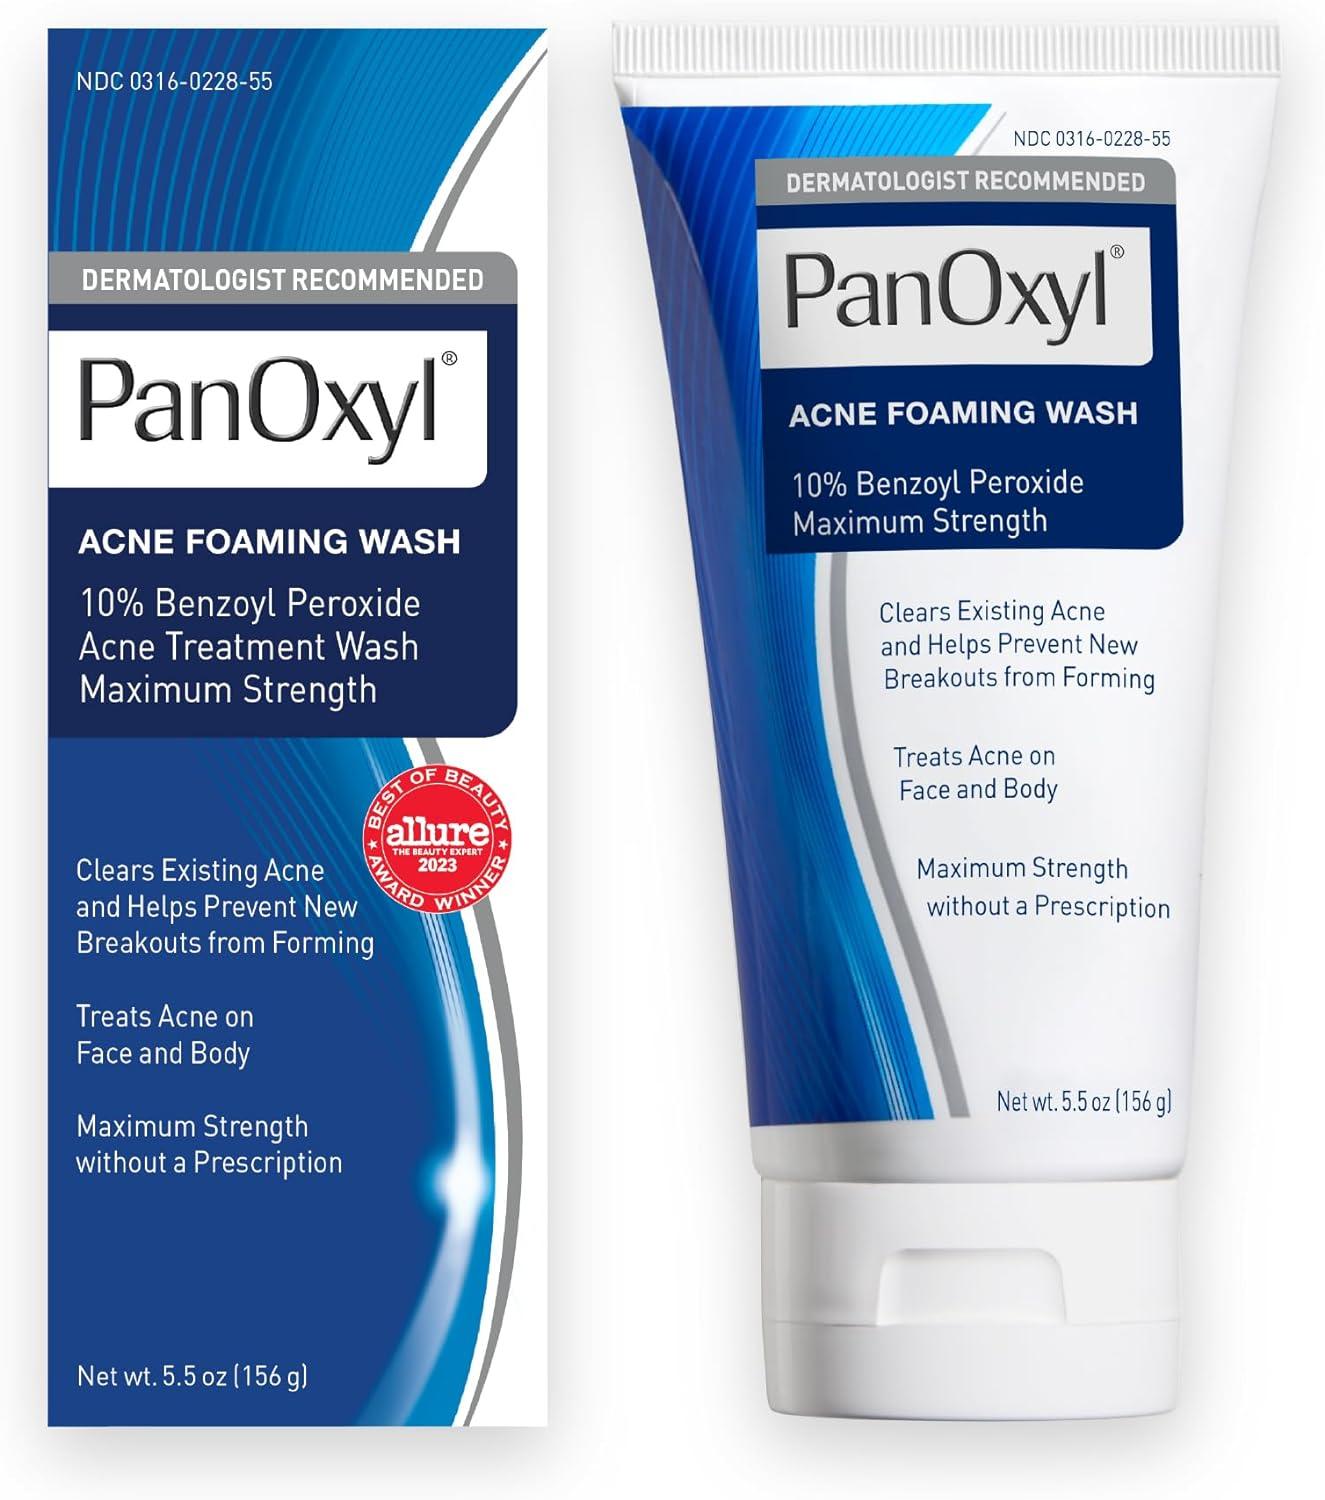 PanOxyl Acne Foaming Wash Benzoyl Peroxide 10% Maximum Strength Antimicrobial, 5.5 Oz - USA Beauty Imports Online